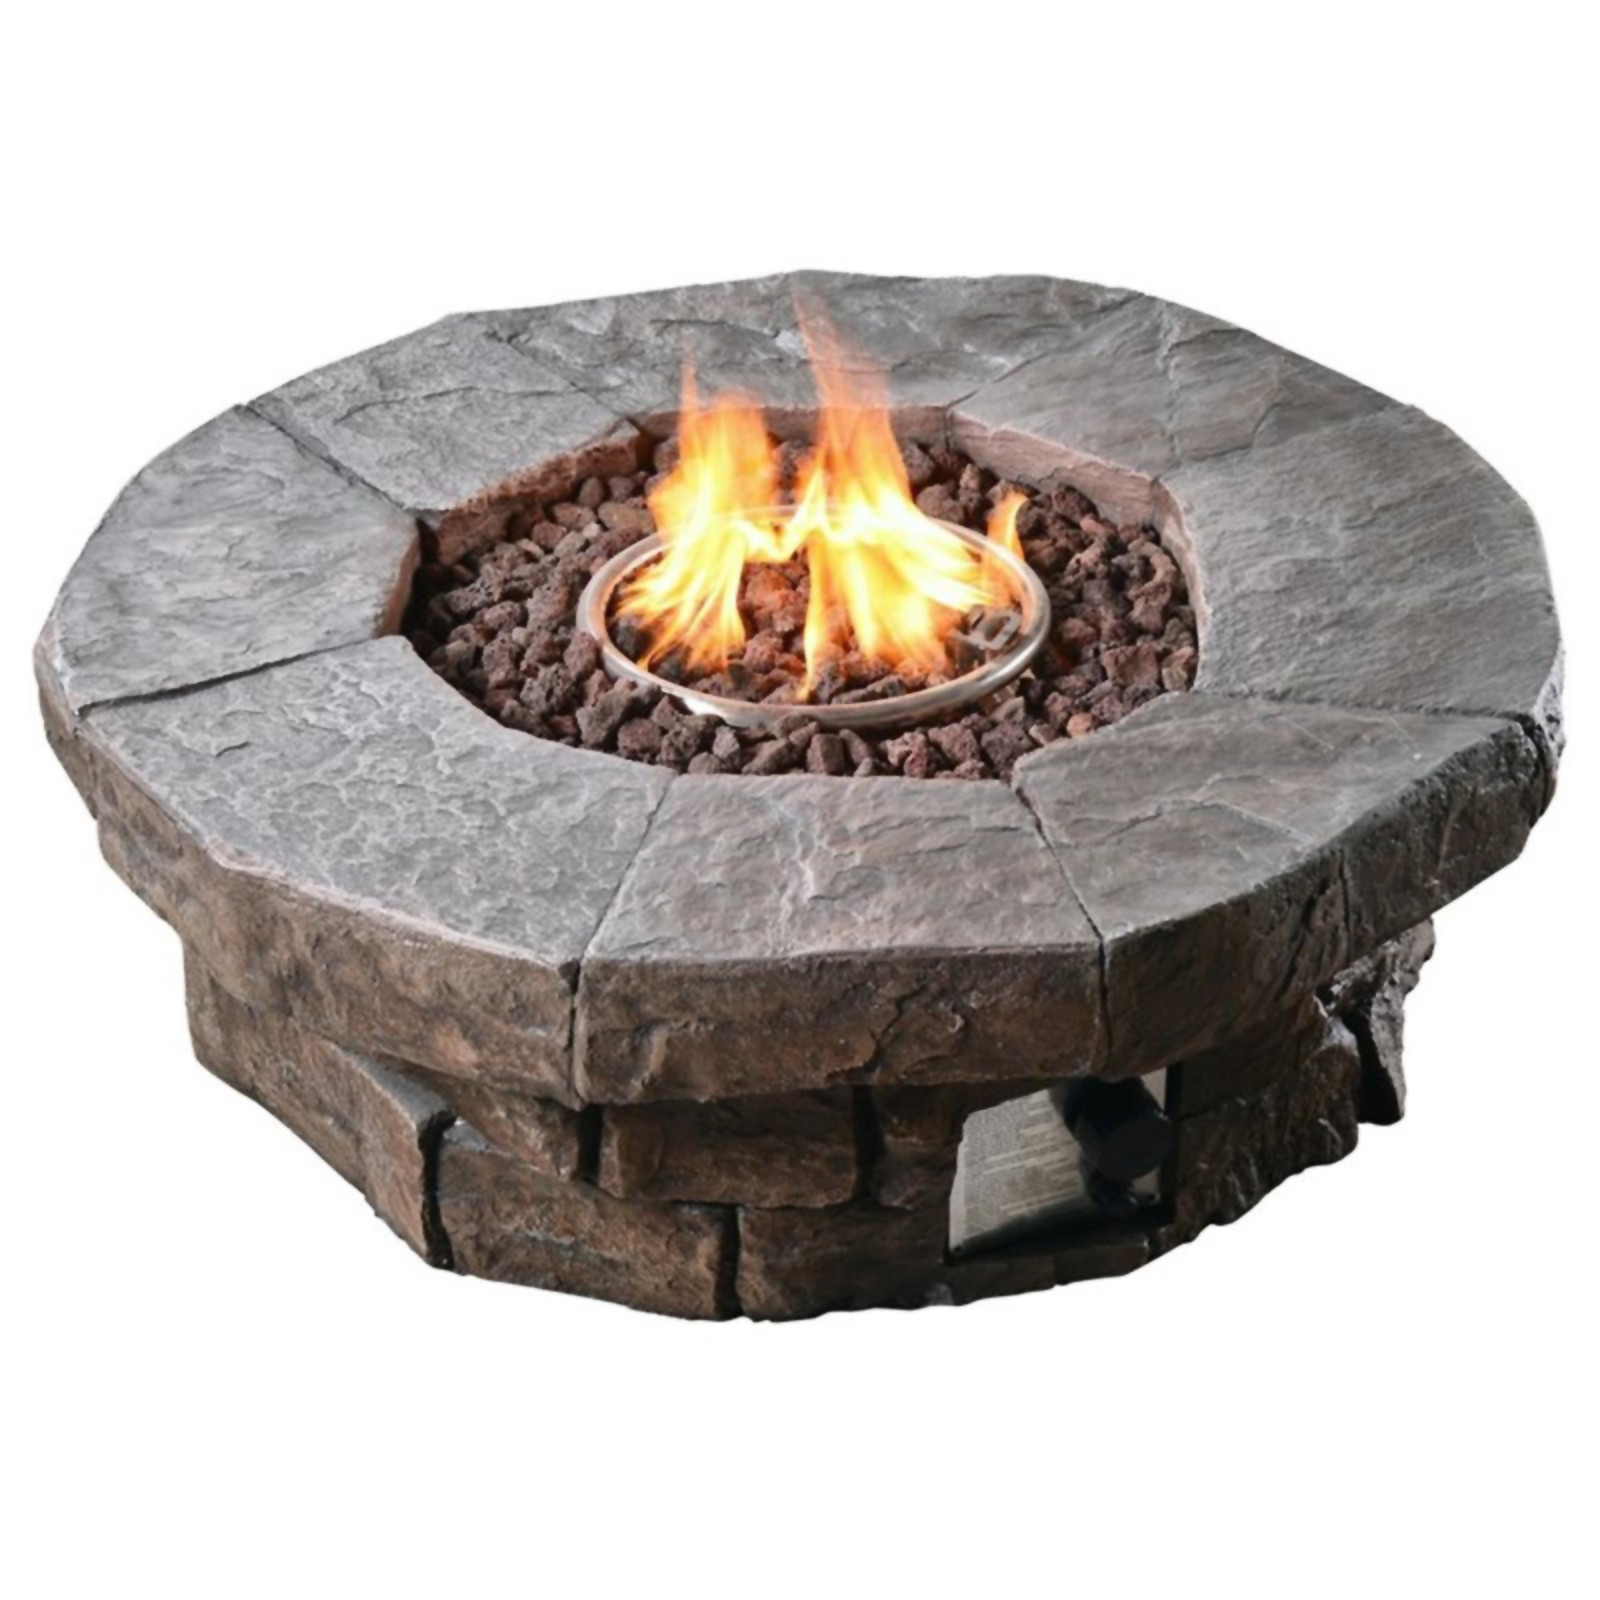 Outdoor Gas Fire Pits
 Peaktop 40 000BTU Outdoor Propane Gas Fire Pit Sears